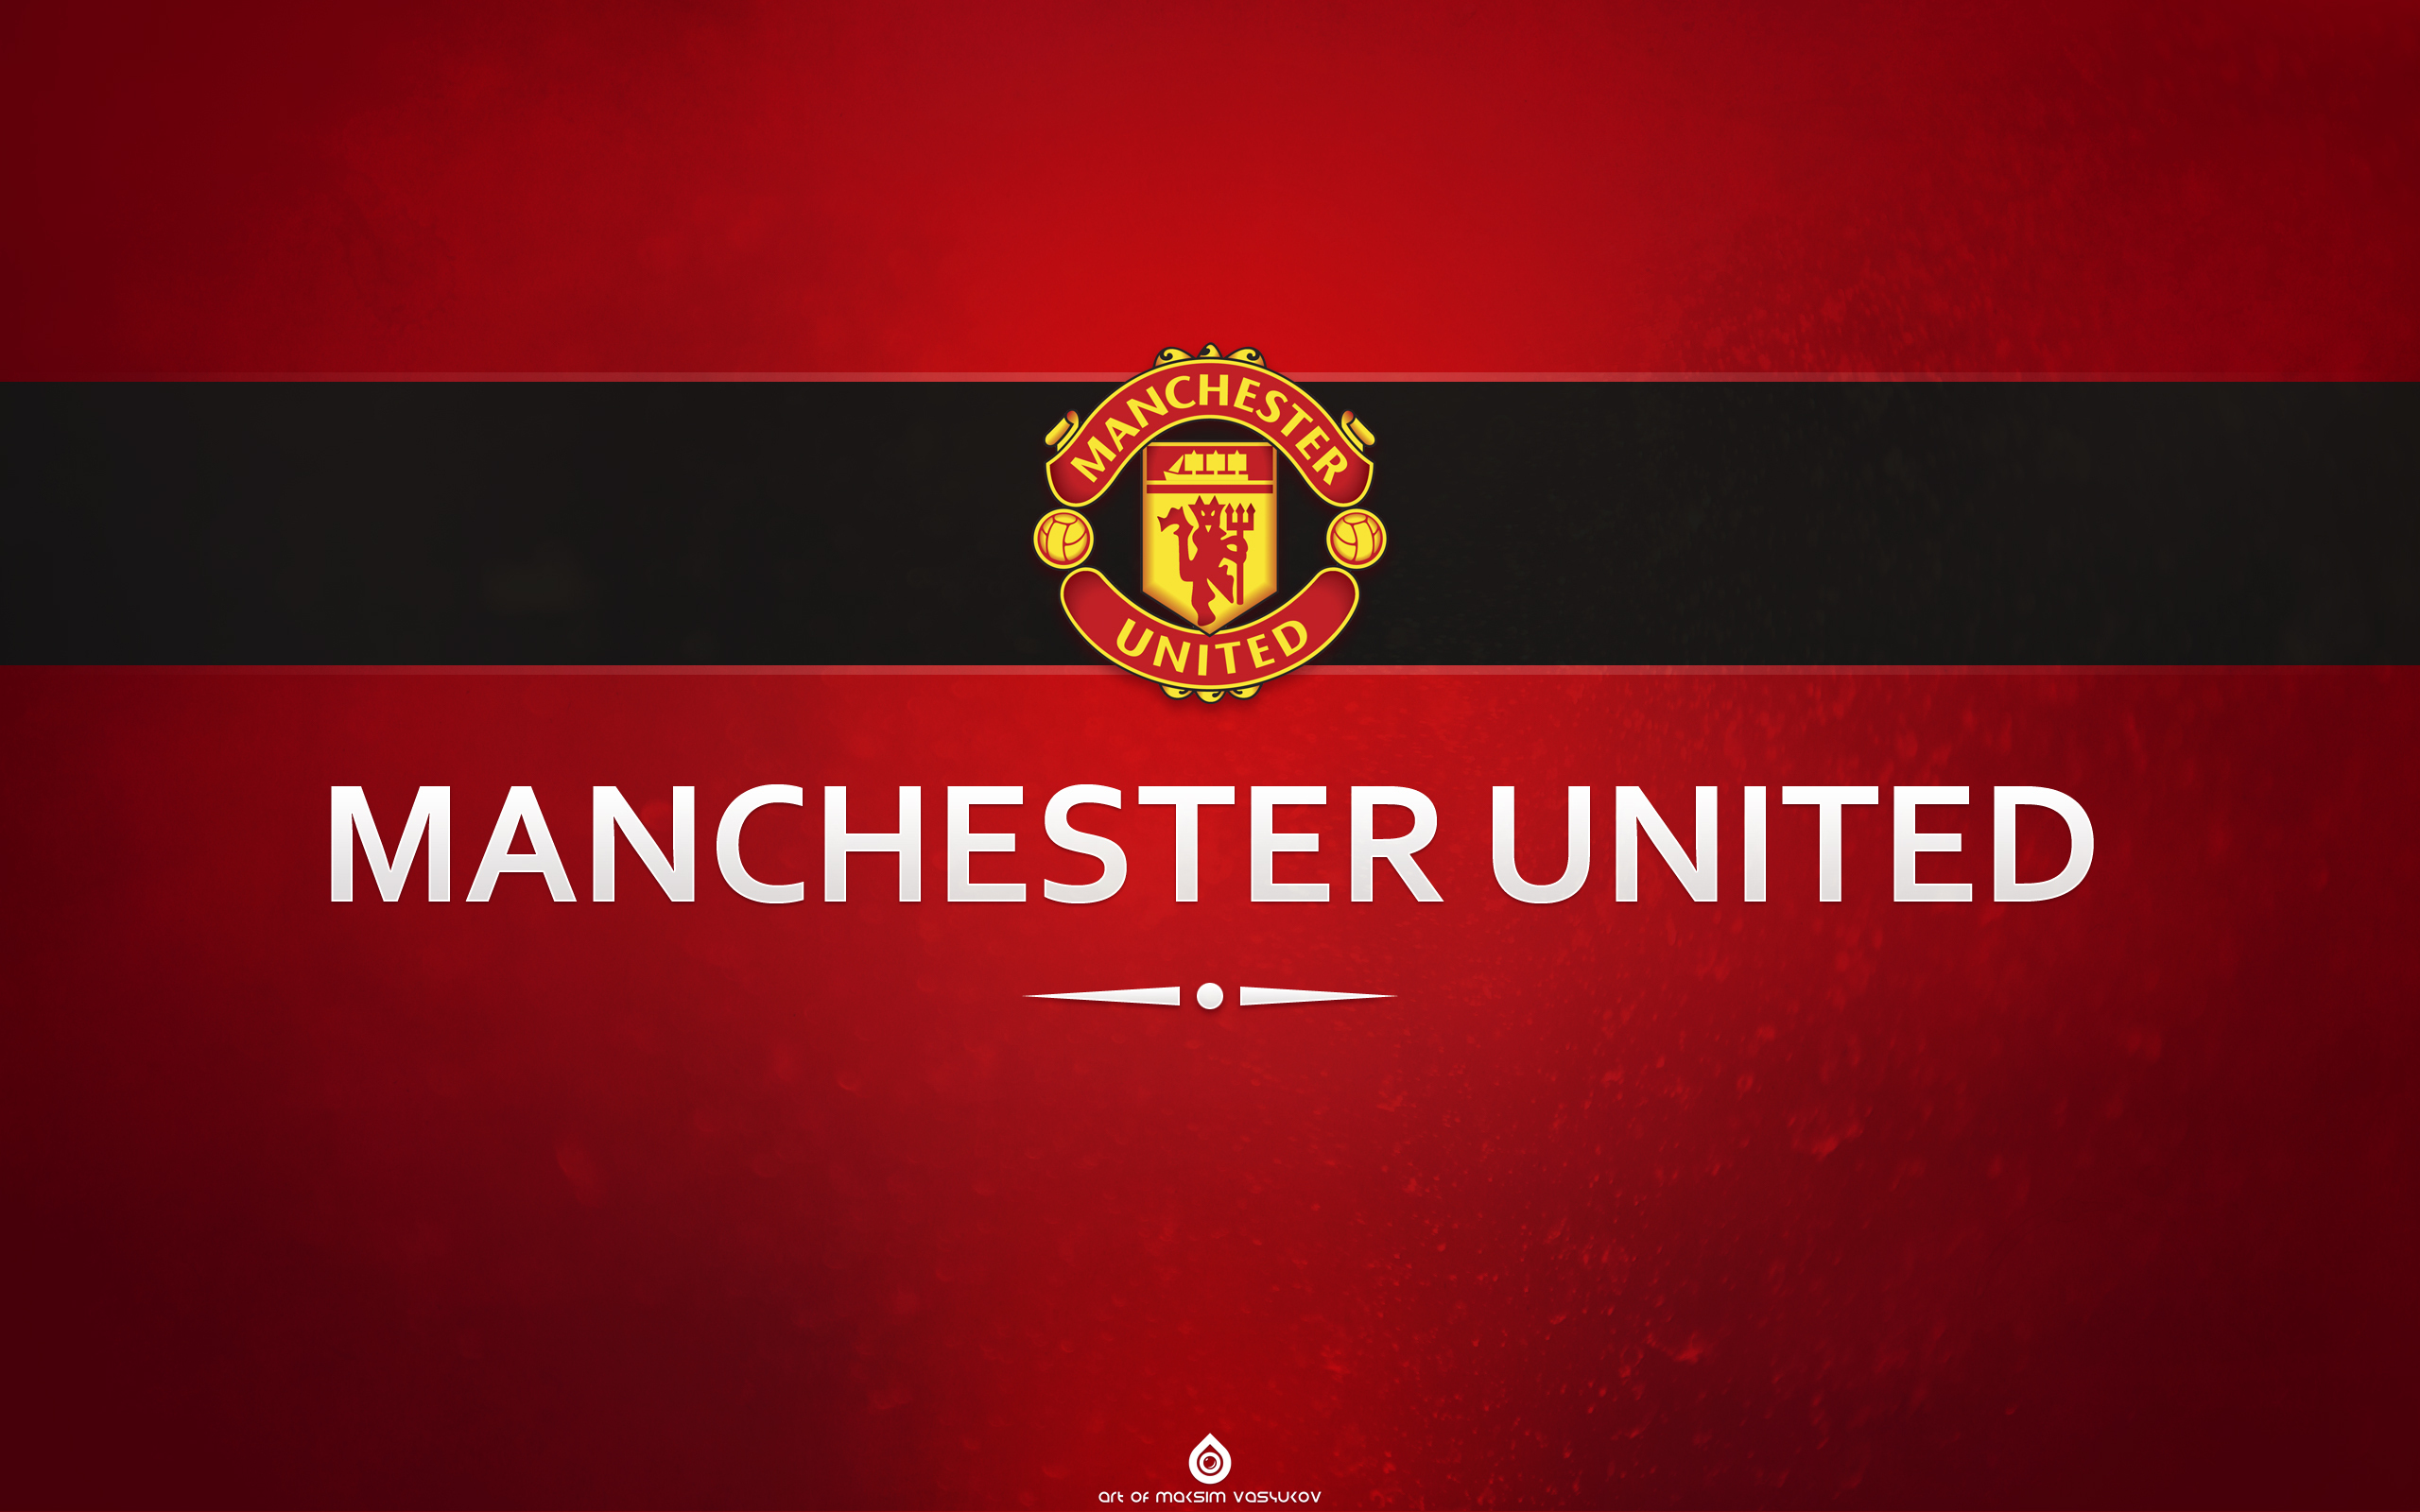 Manchester United Images Icons Wallpapers and Photos on Fanpop 2560x1600